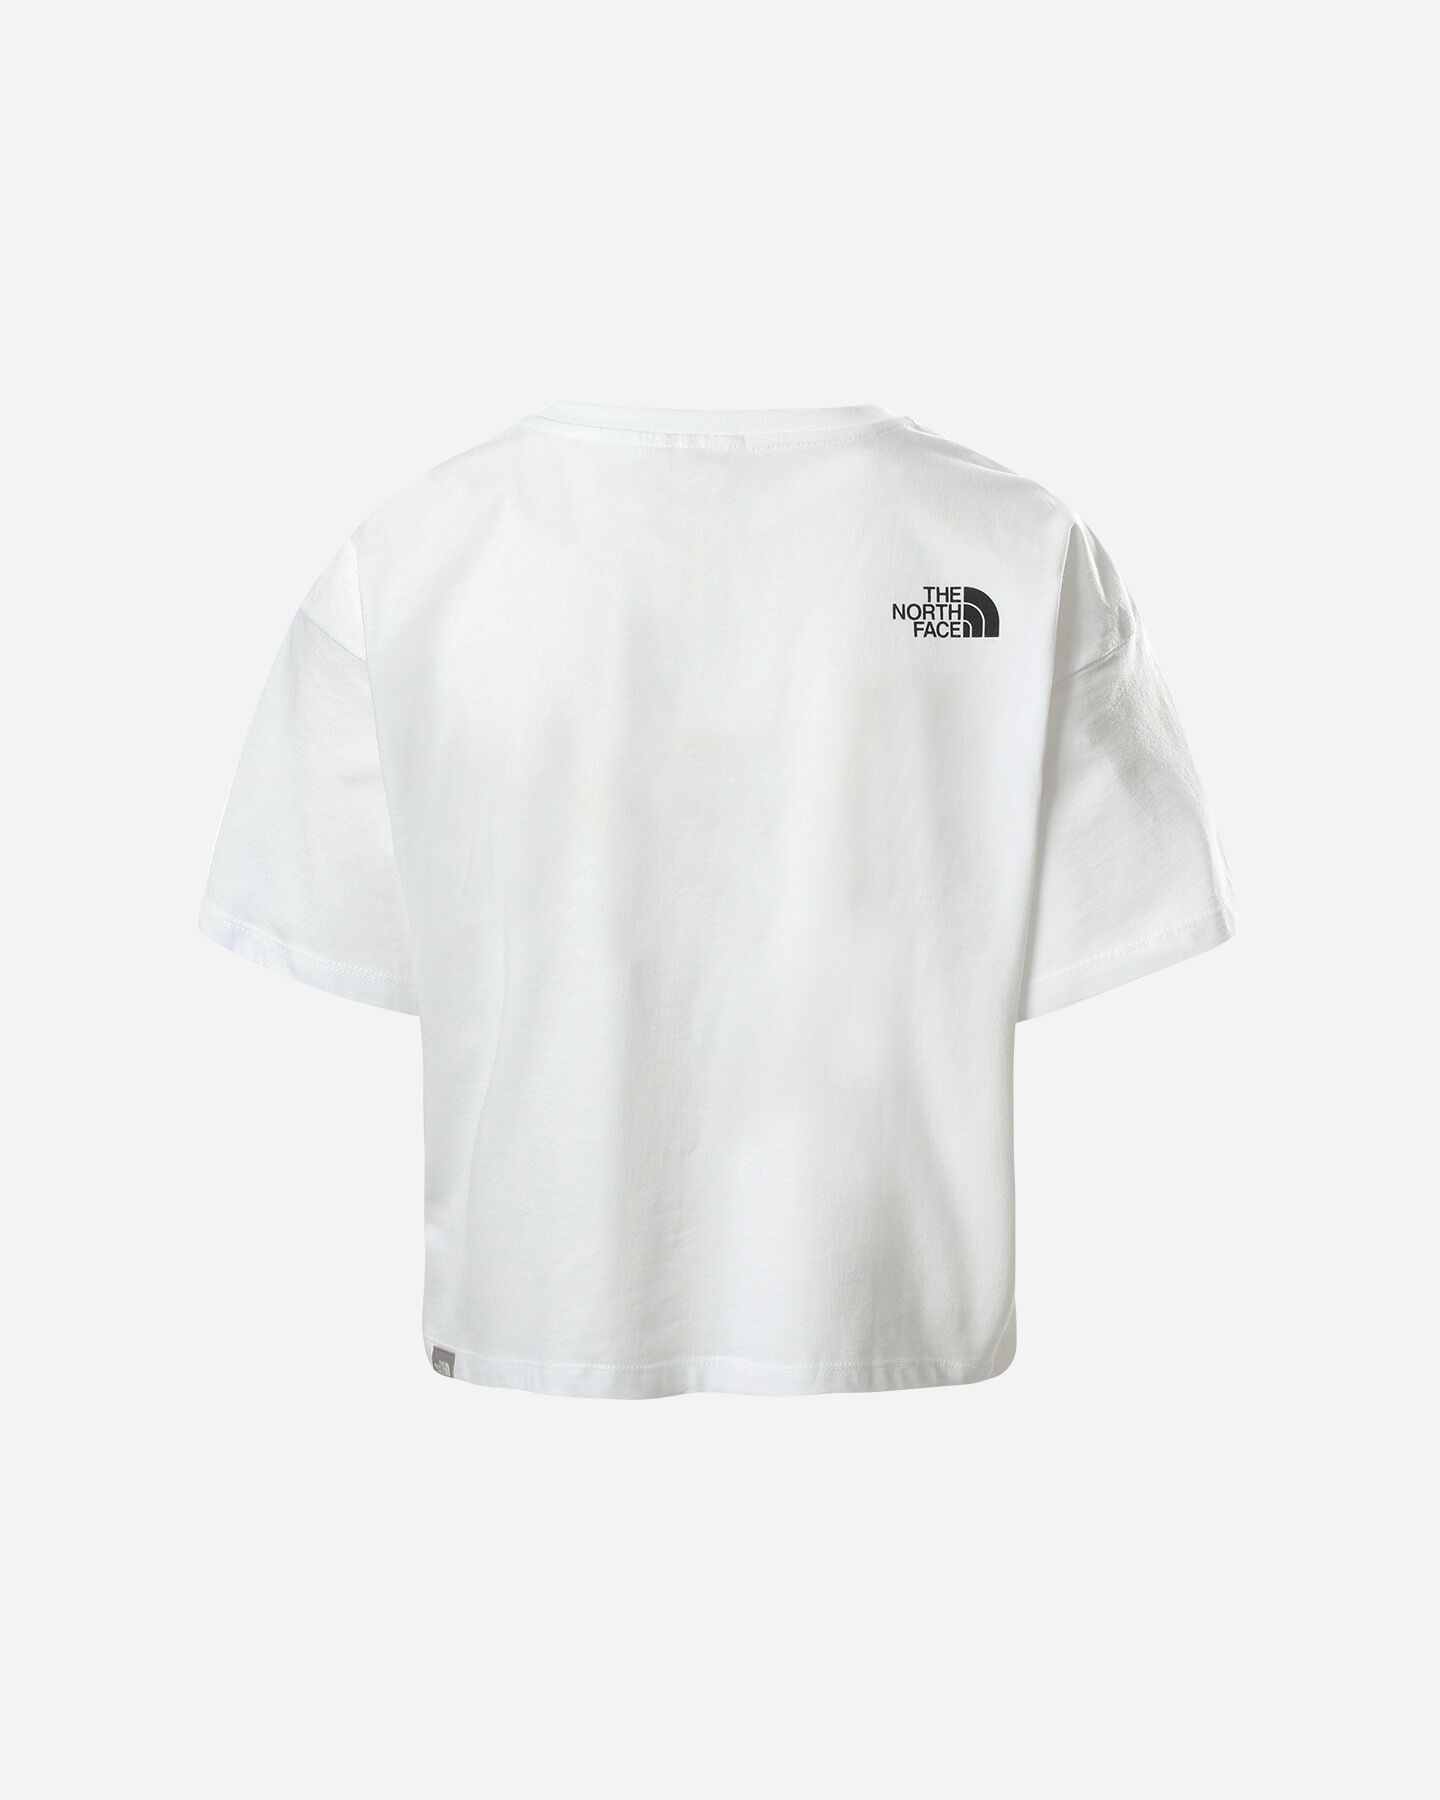  T-Shirt THE NORTH FACE CROP DOME W S5203586|FN4|XS scatto 1